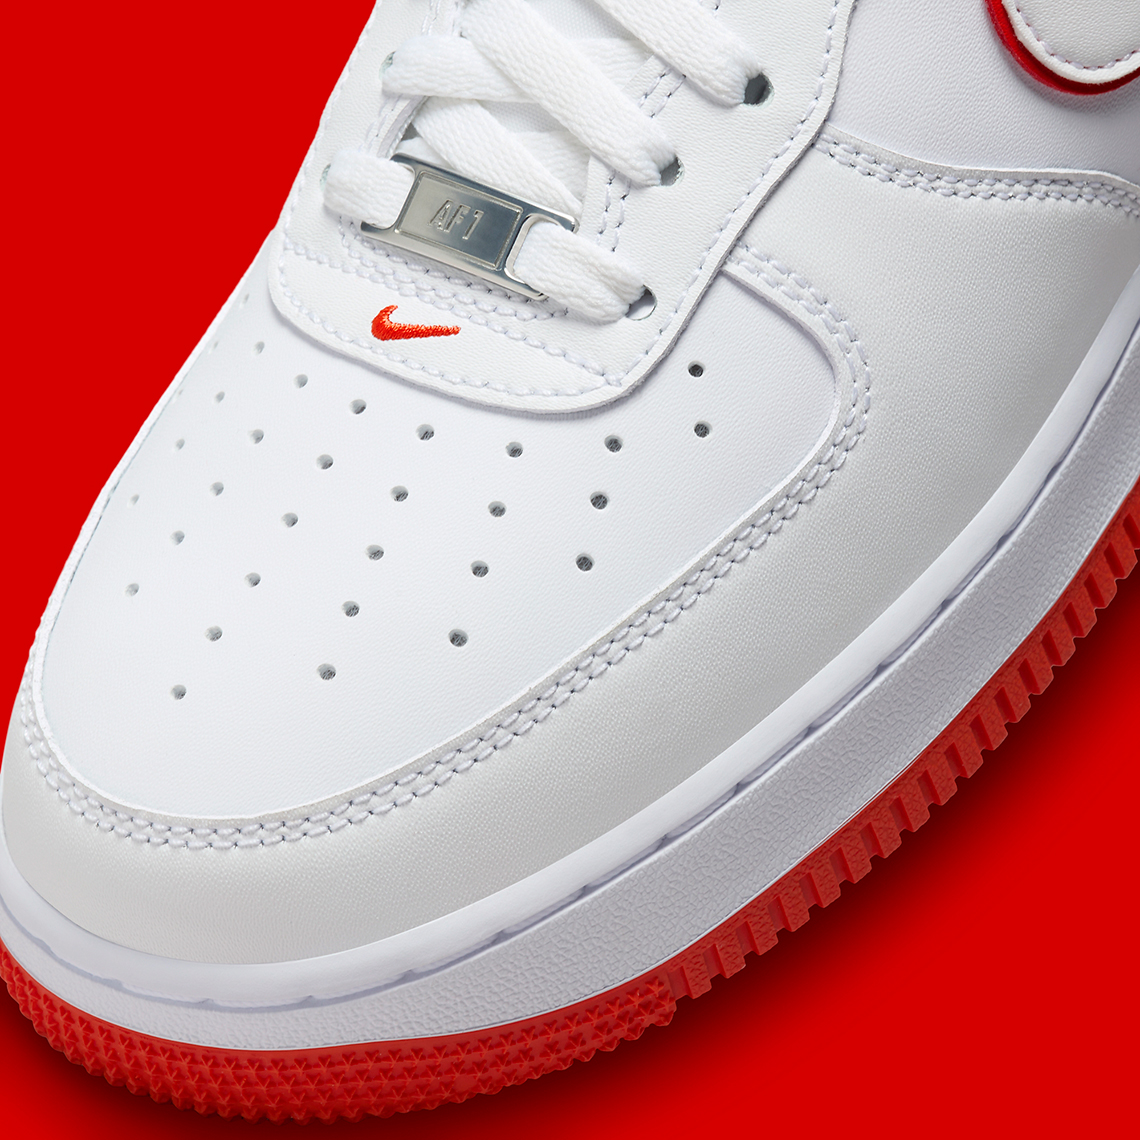 nike air force 1 low white red dv0788 102 8